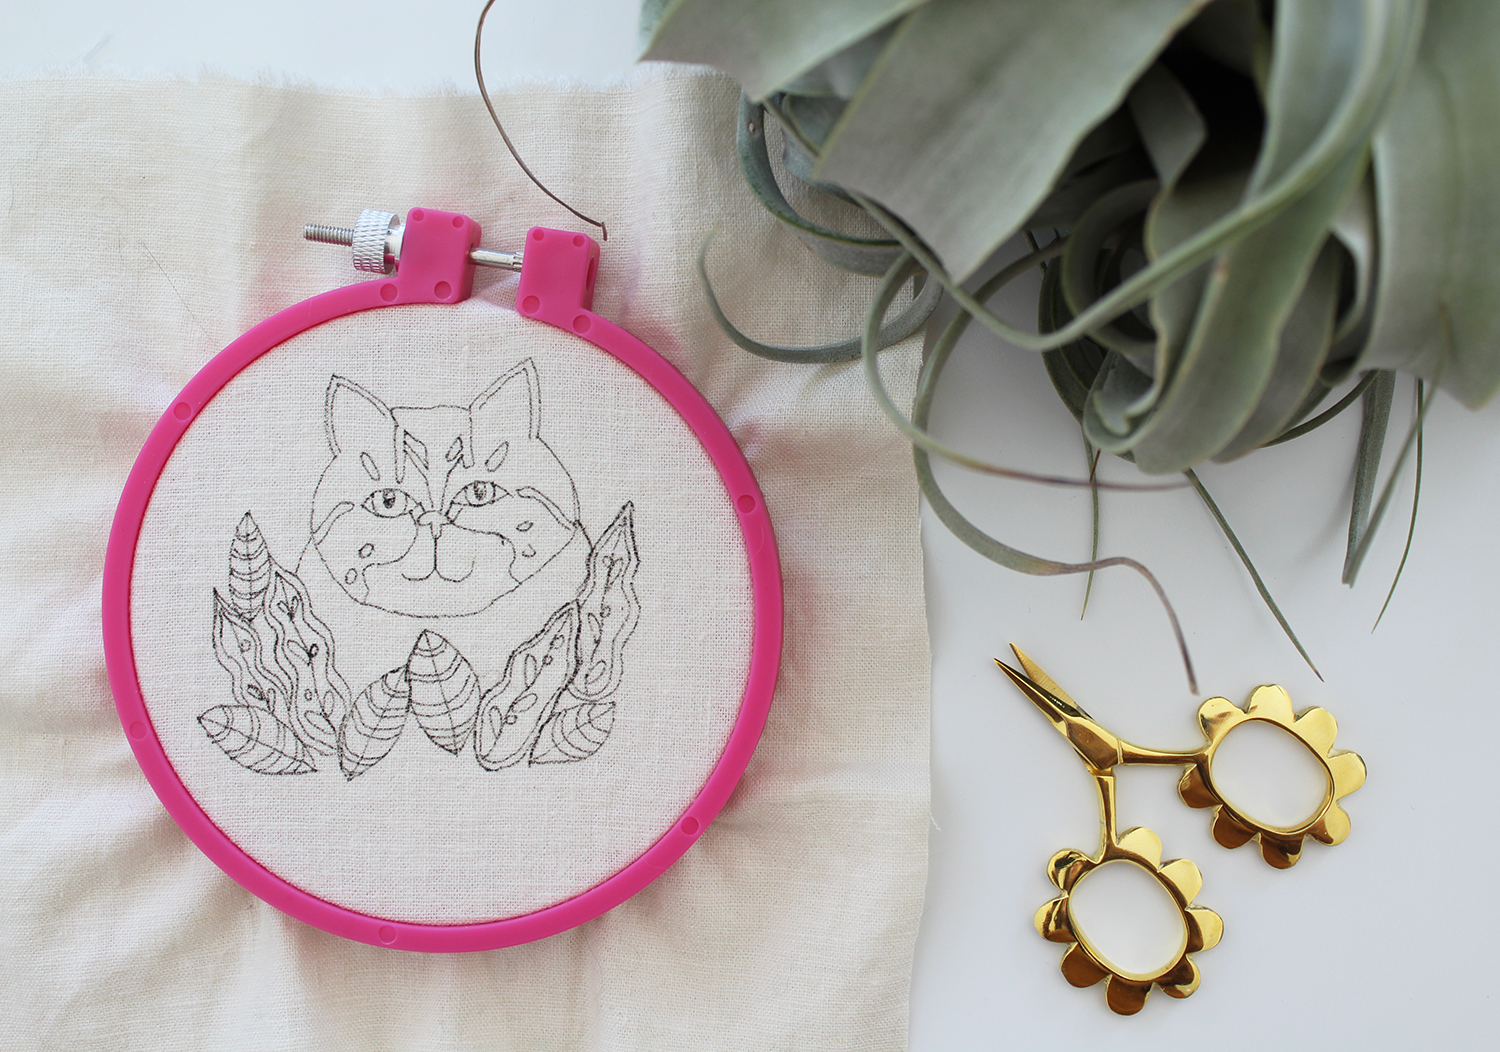 Plant and cat embroidery by Sara Barnes